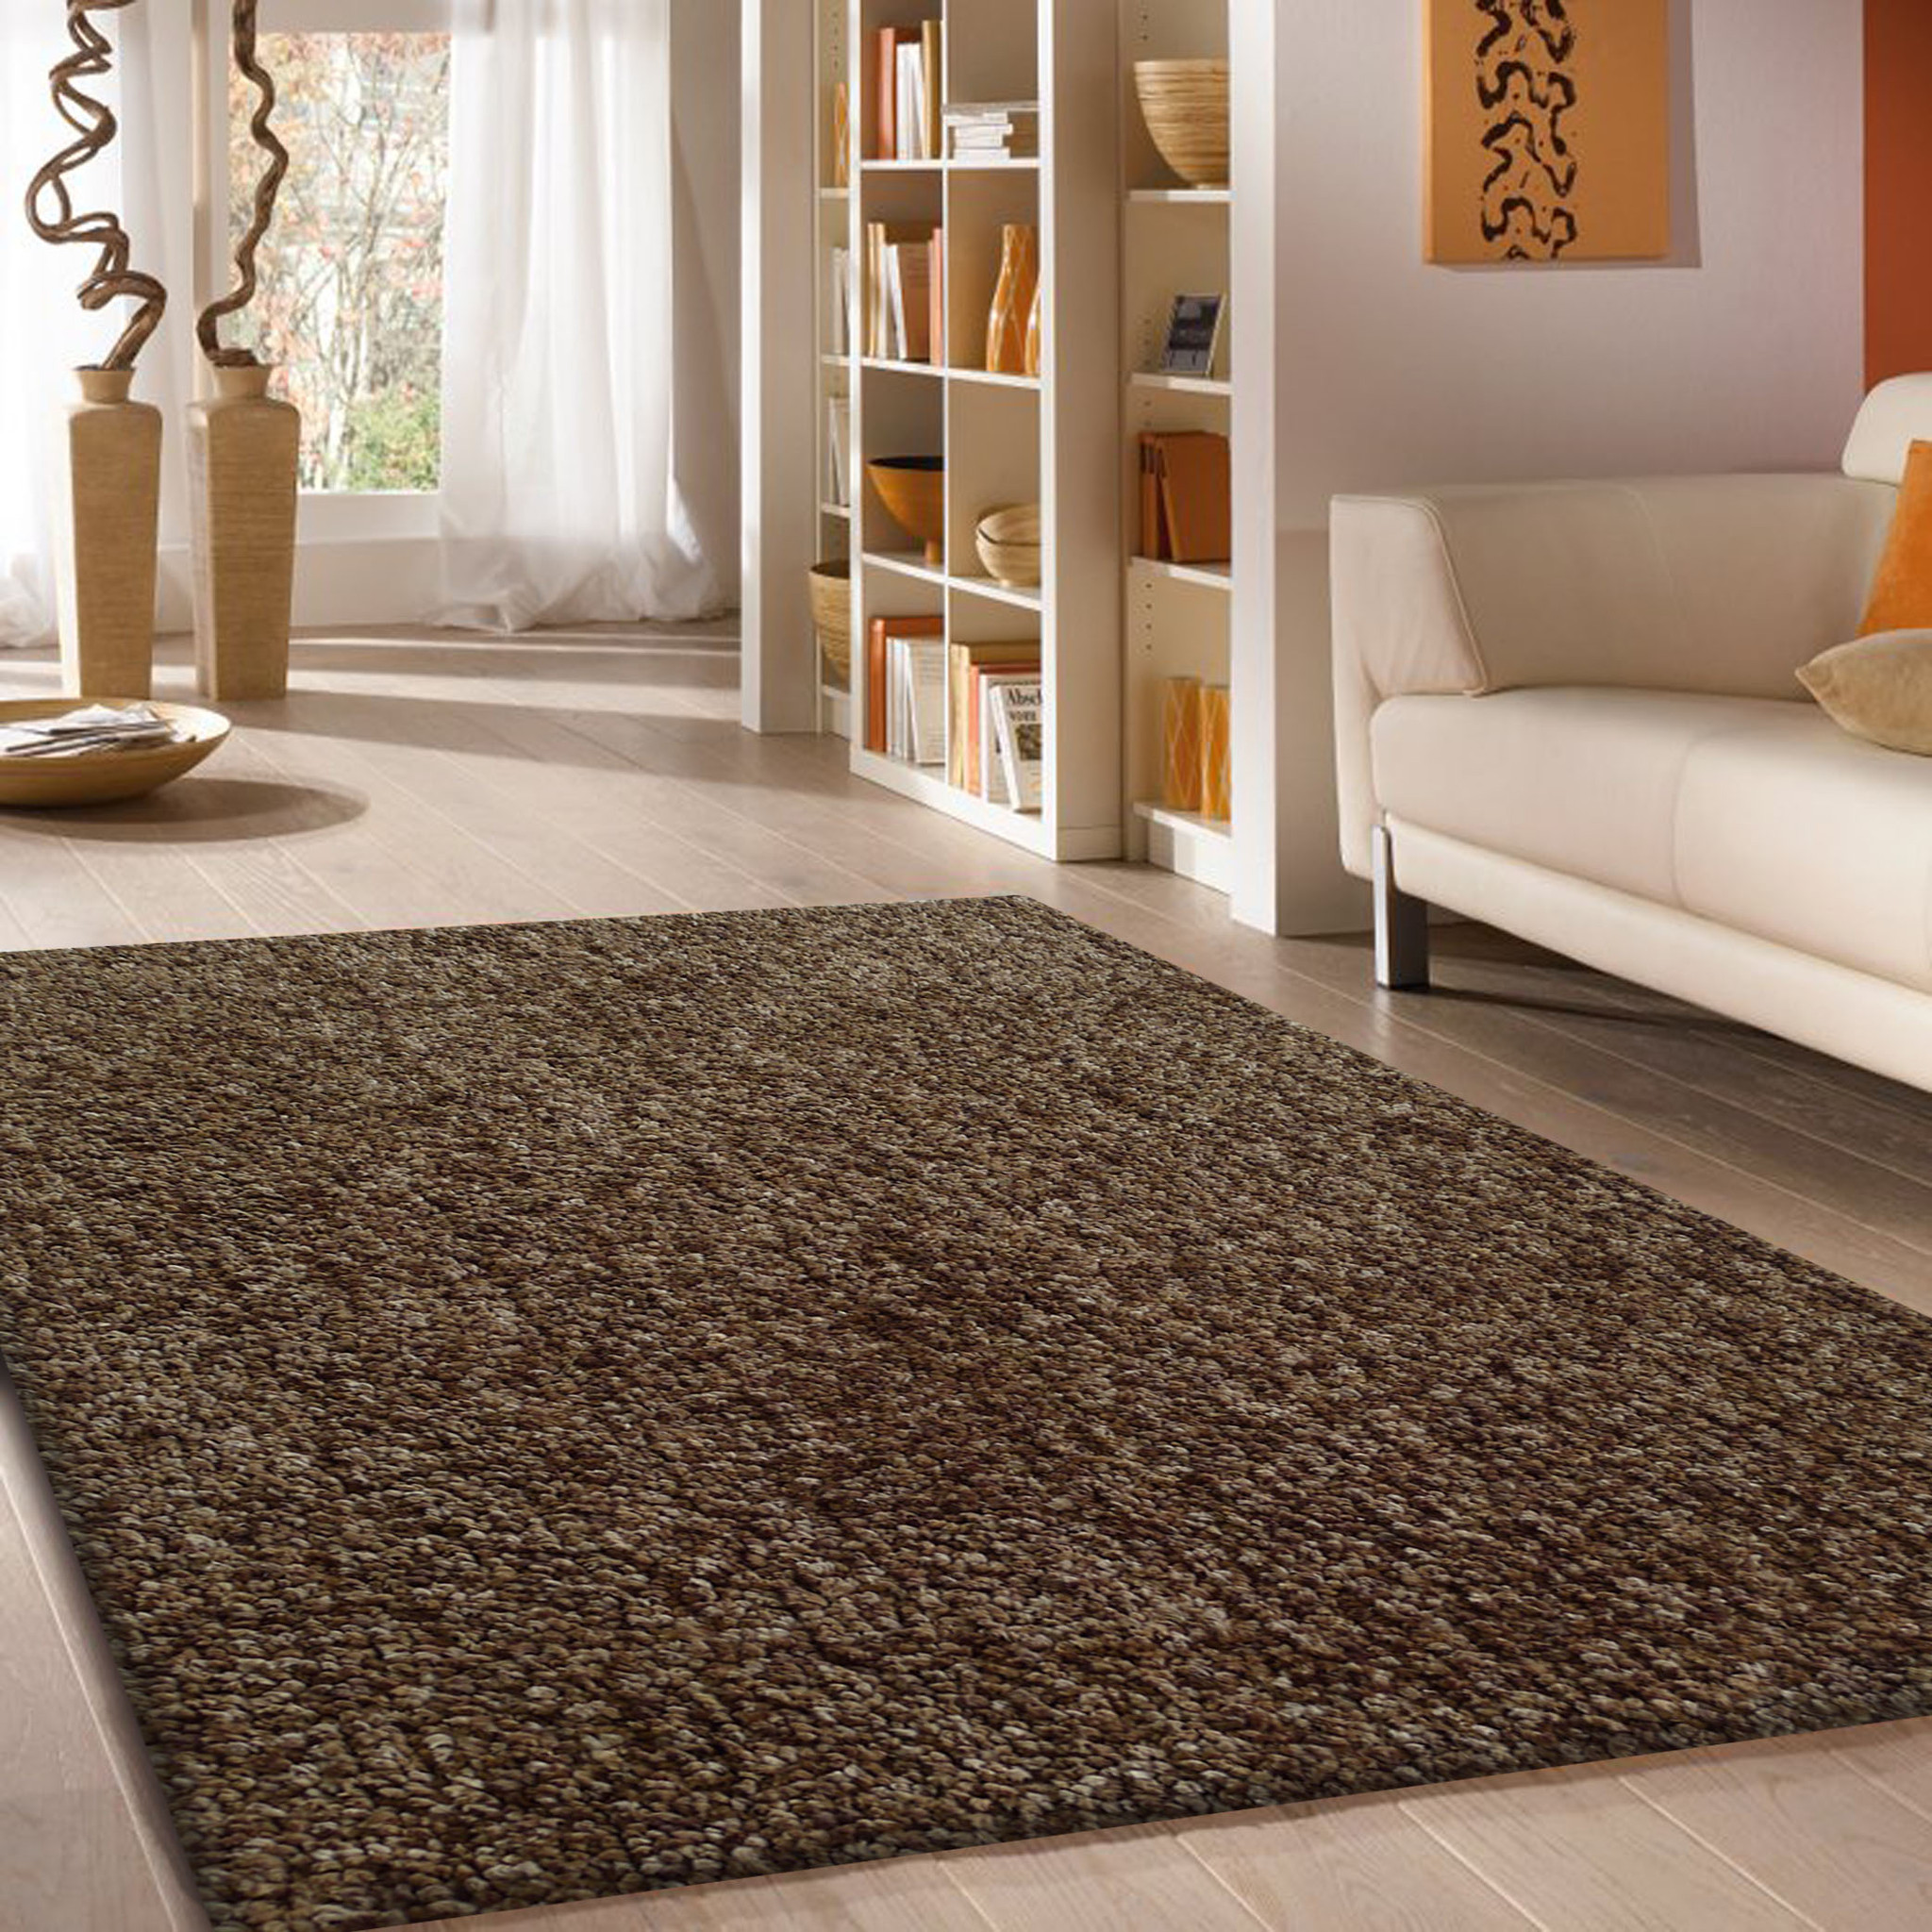 Pictures of Hand-tufted Winter Grey Thick Plush Shag Area Rug 5u0027 x 7u0027 u2026 thick plush area rugs